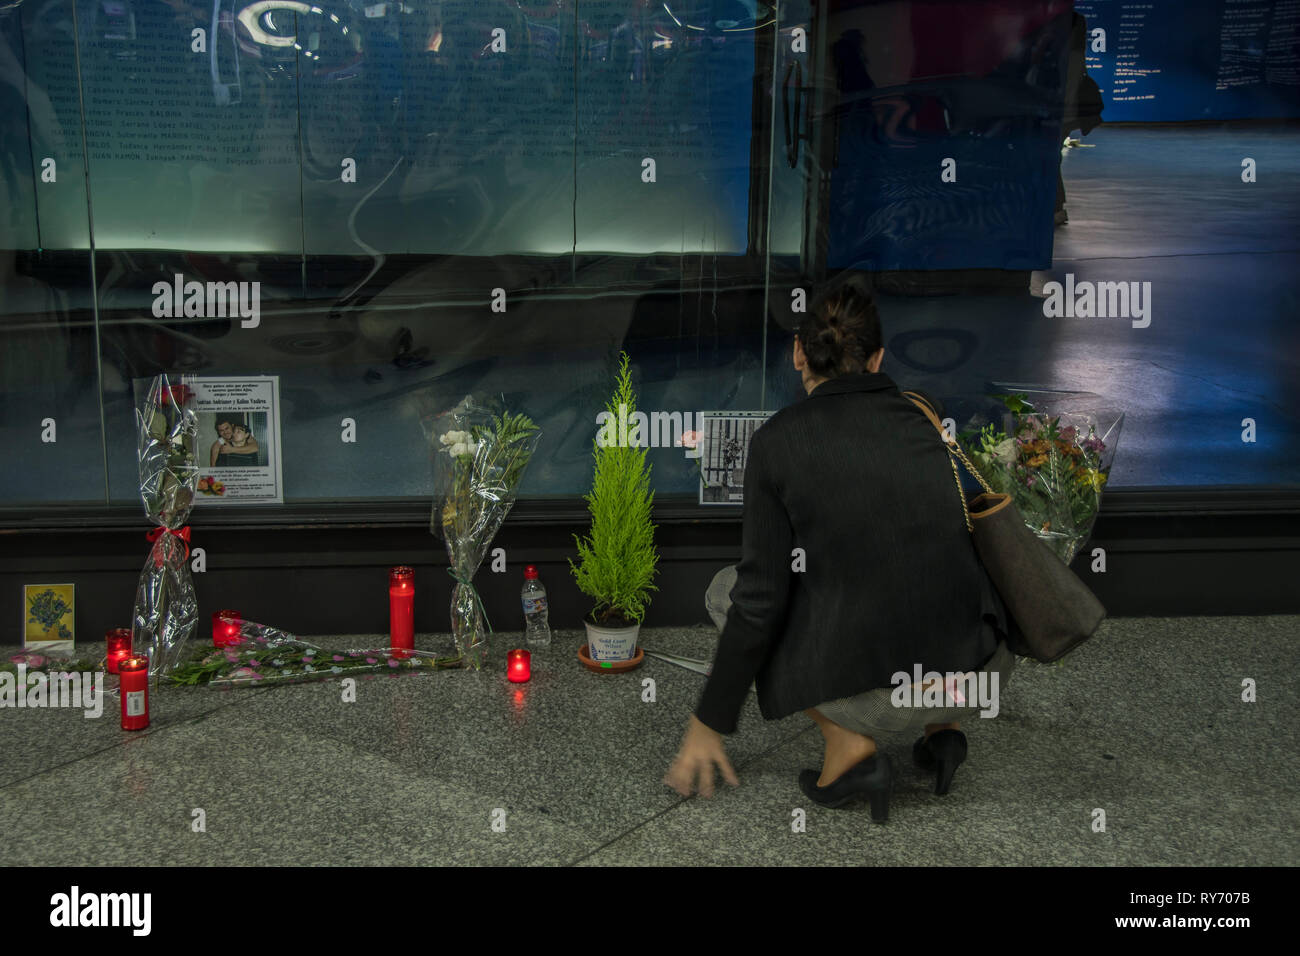 A woman seen holding wreath flowers during a tribute of those affected by the terrorist attack in 2004. Homage to the victims of 11 terrorism attack 2004 at the atocha train station in Madrid, Spain. Stock Photo